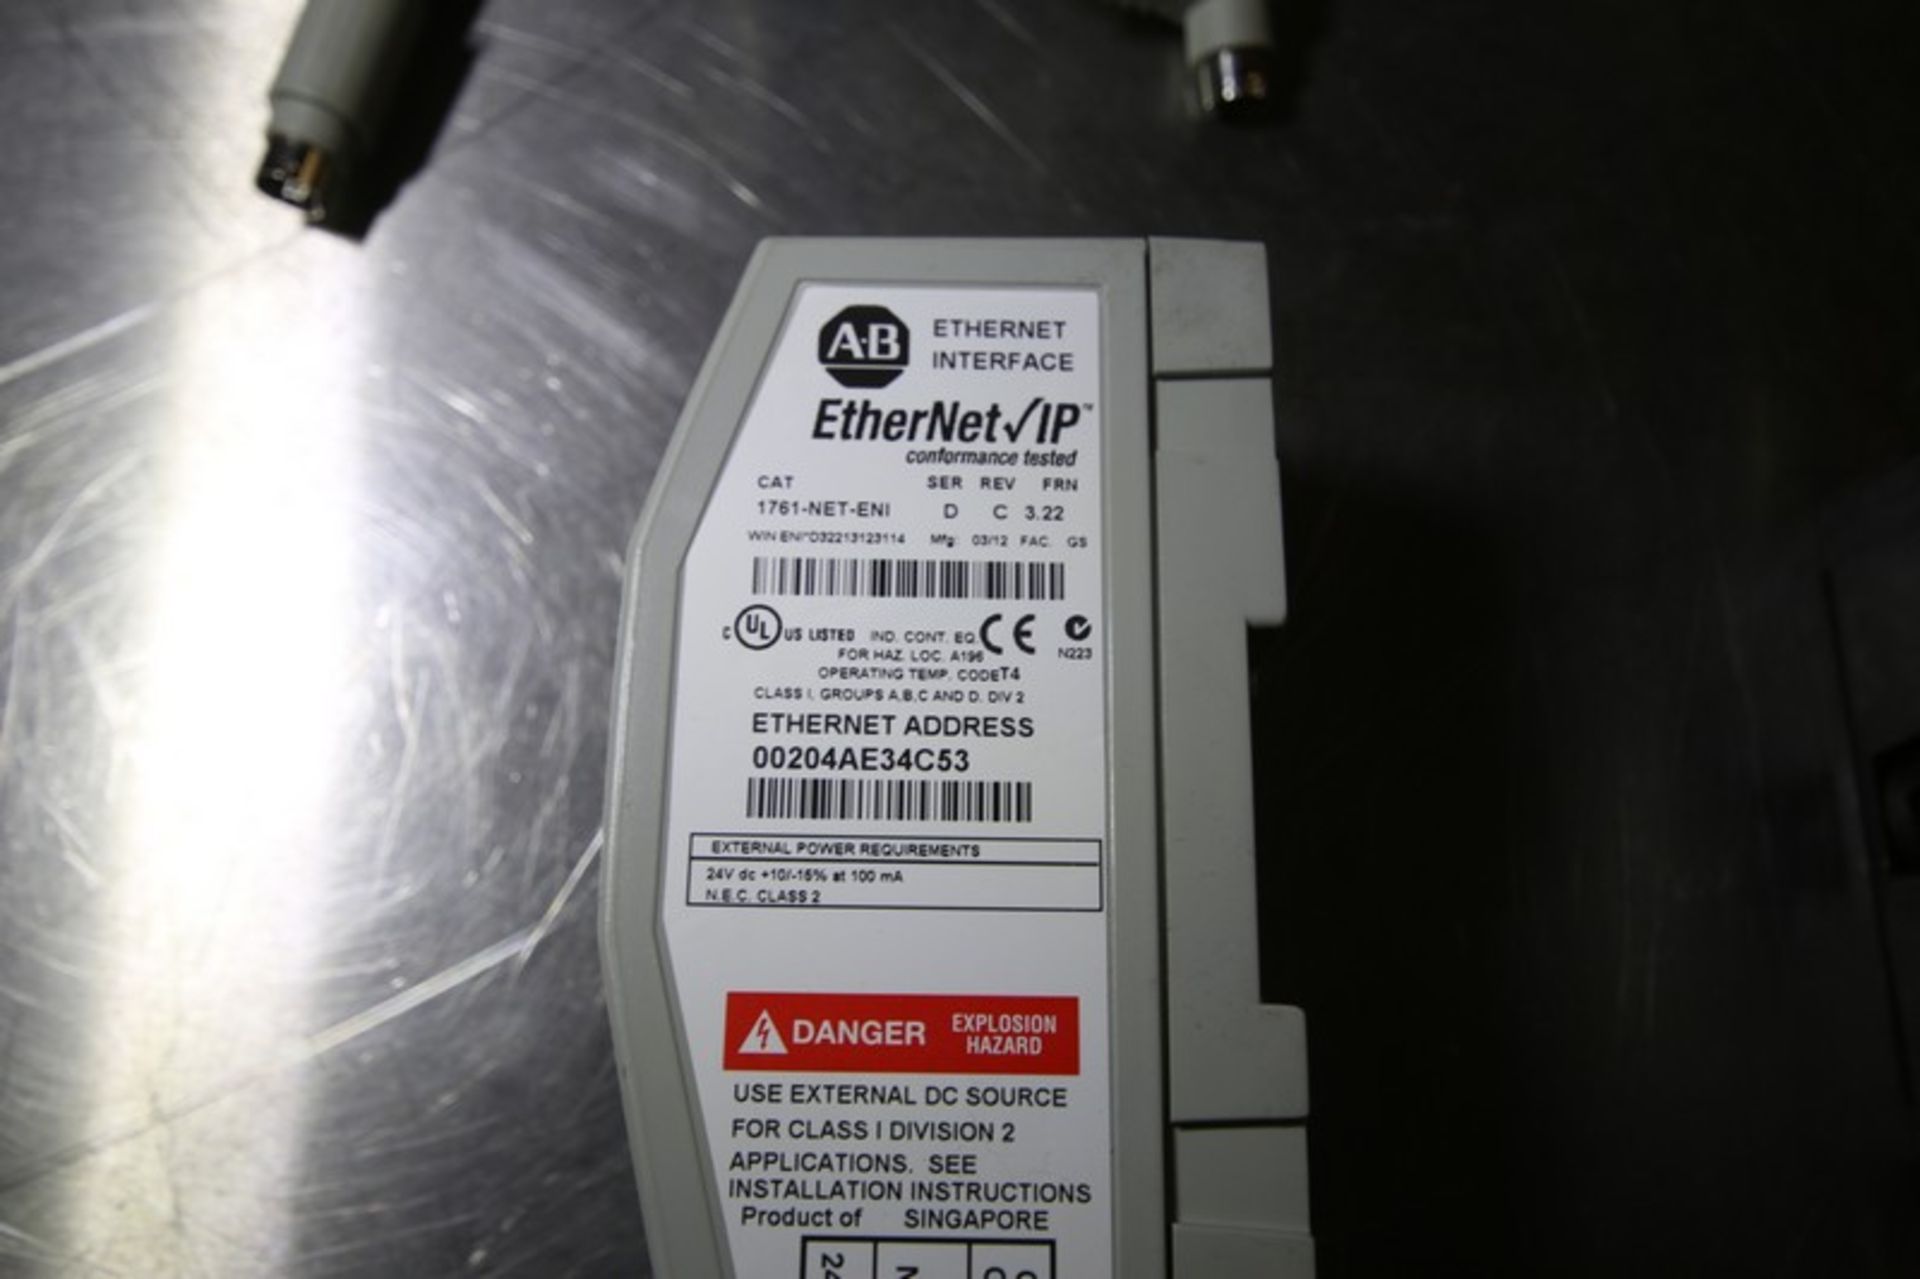 Production Control Panel Electrical Includes Allen Bradley Micrologix 1200 PLC Controller - Cat. No. - Image 5 of 6